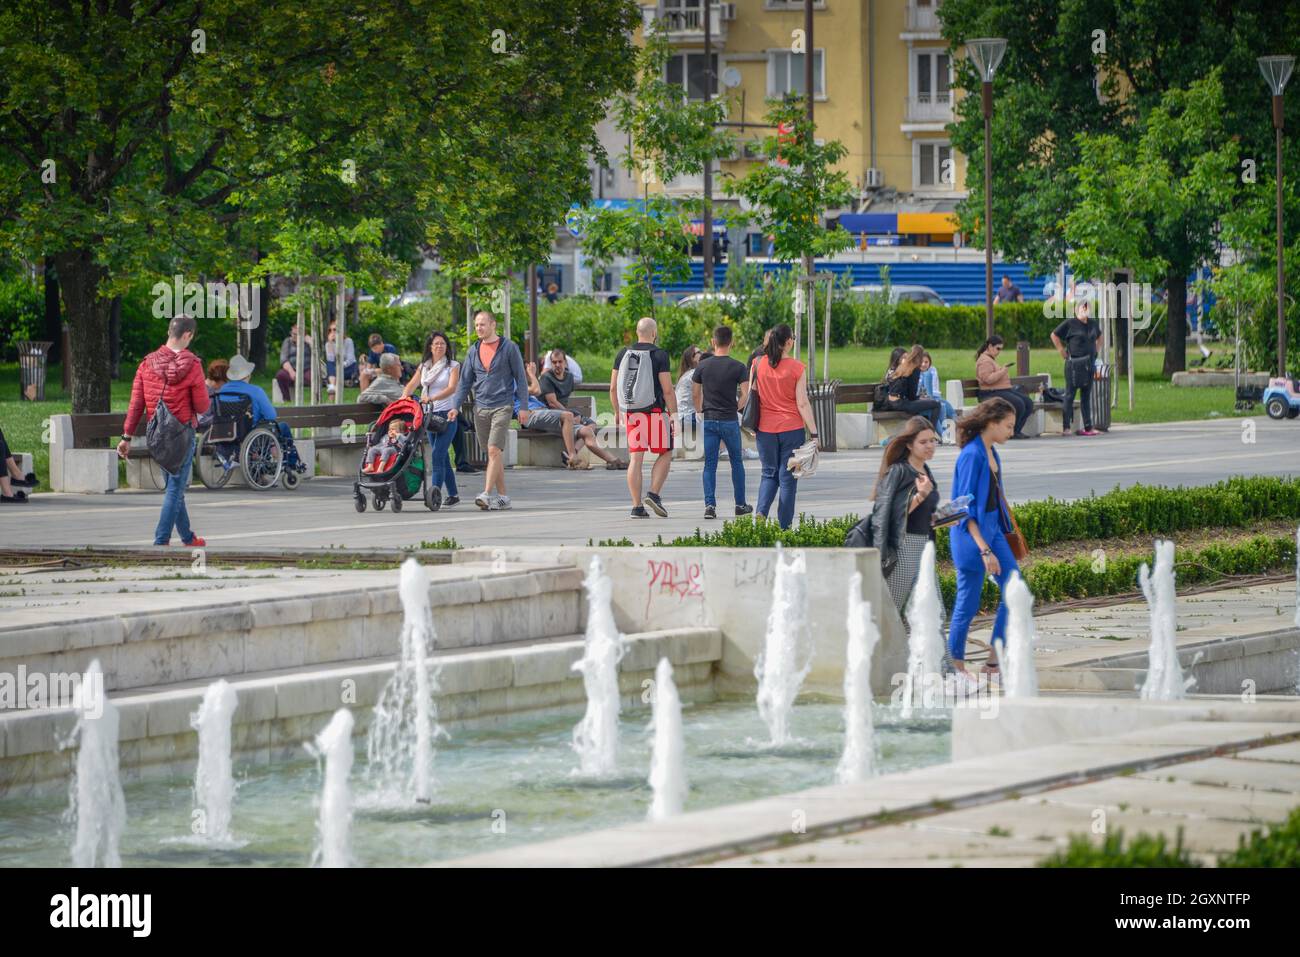 Fountain, Square in front of the National Palace of Culture, Bulevard Bulgaria, Sofia, Bulgaria Stock Photo